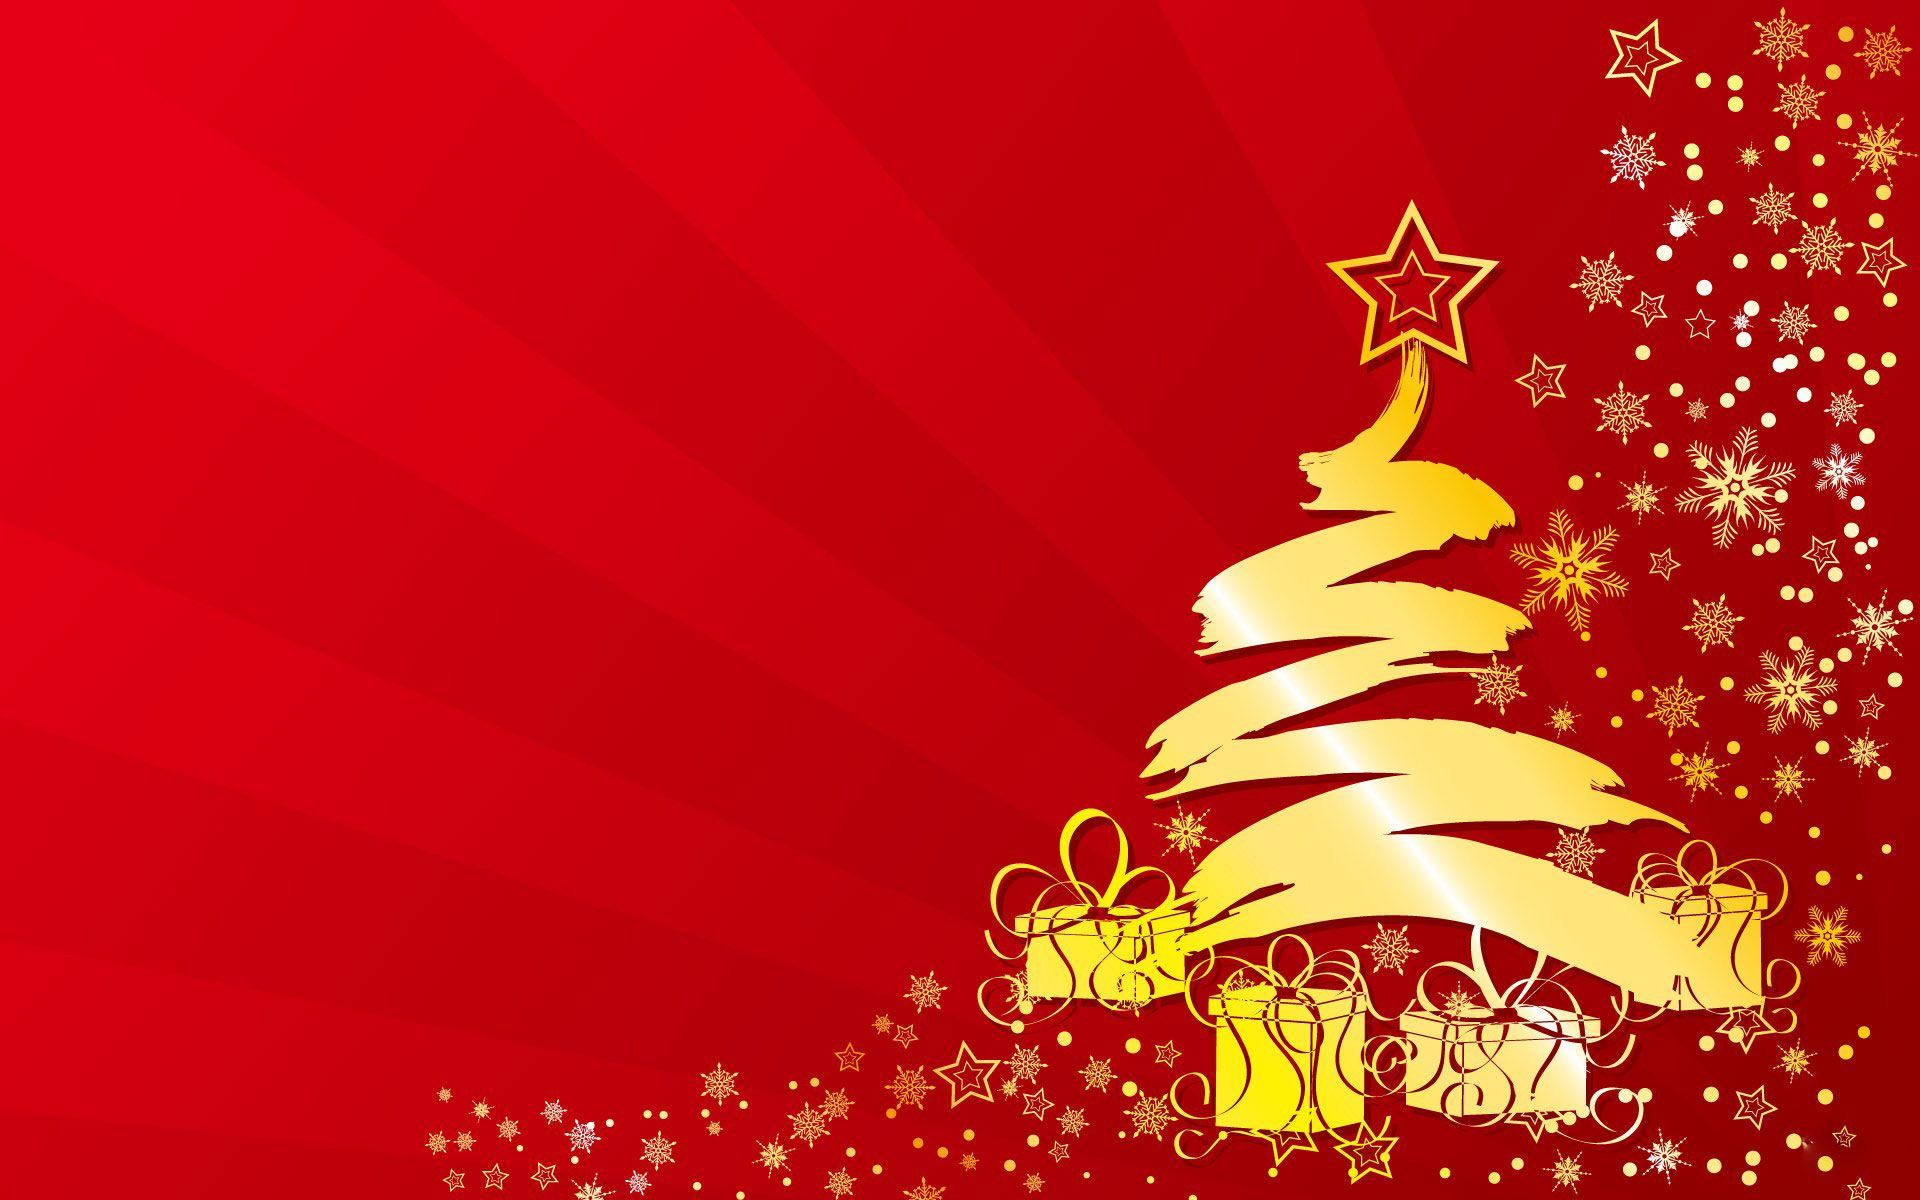 Christmas Tree Clipart. red christmas tree background HD wallpaper red chr. Merry christmas wallpaper, Christmas wallpaper background, Christmas tree wallpaper